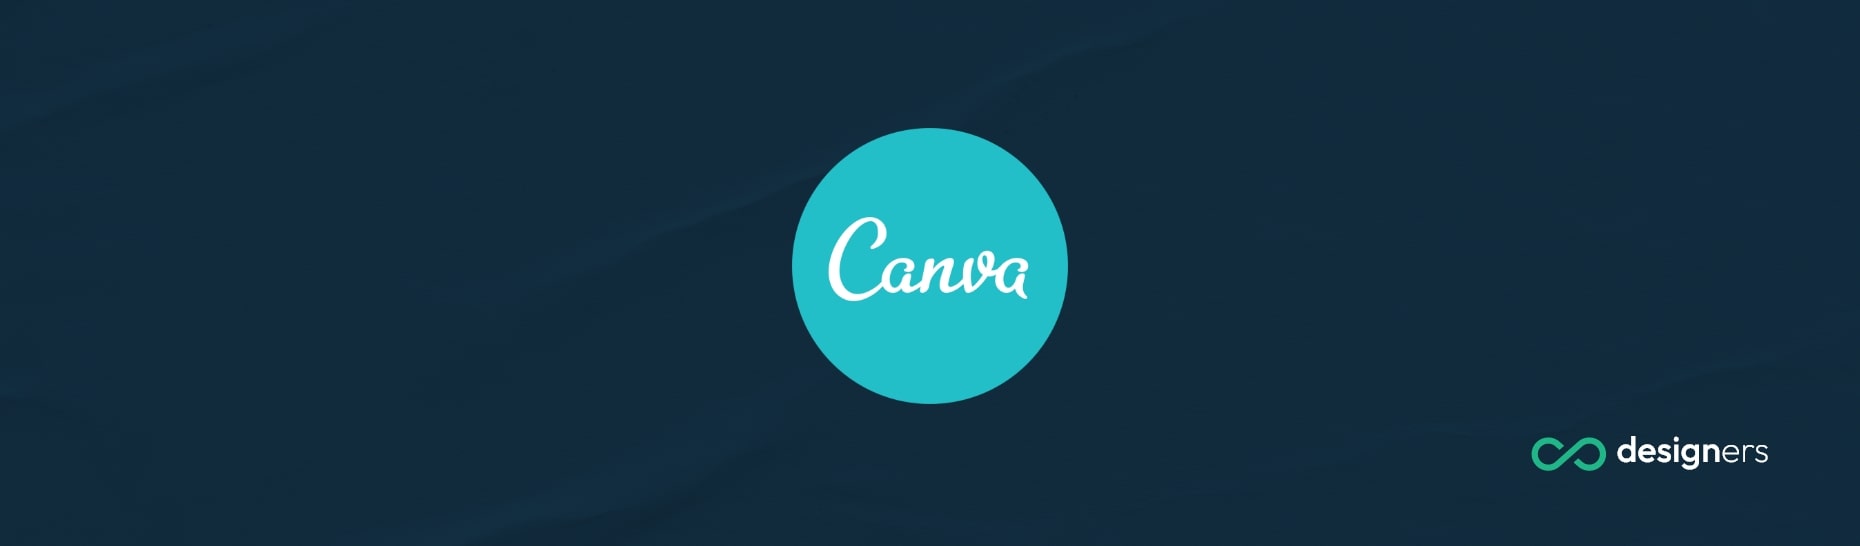 Is Canva Publicly Traded?